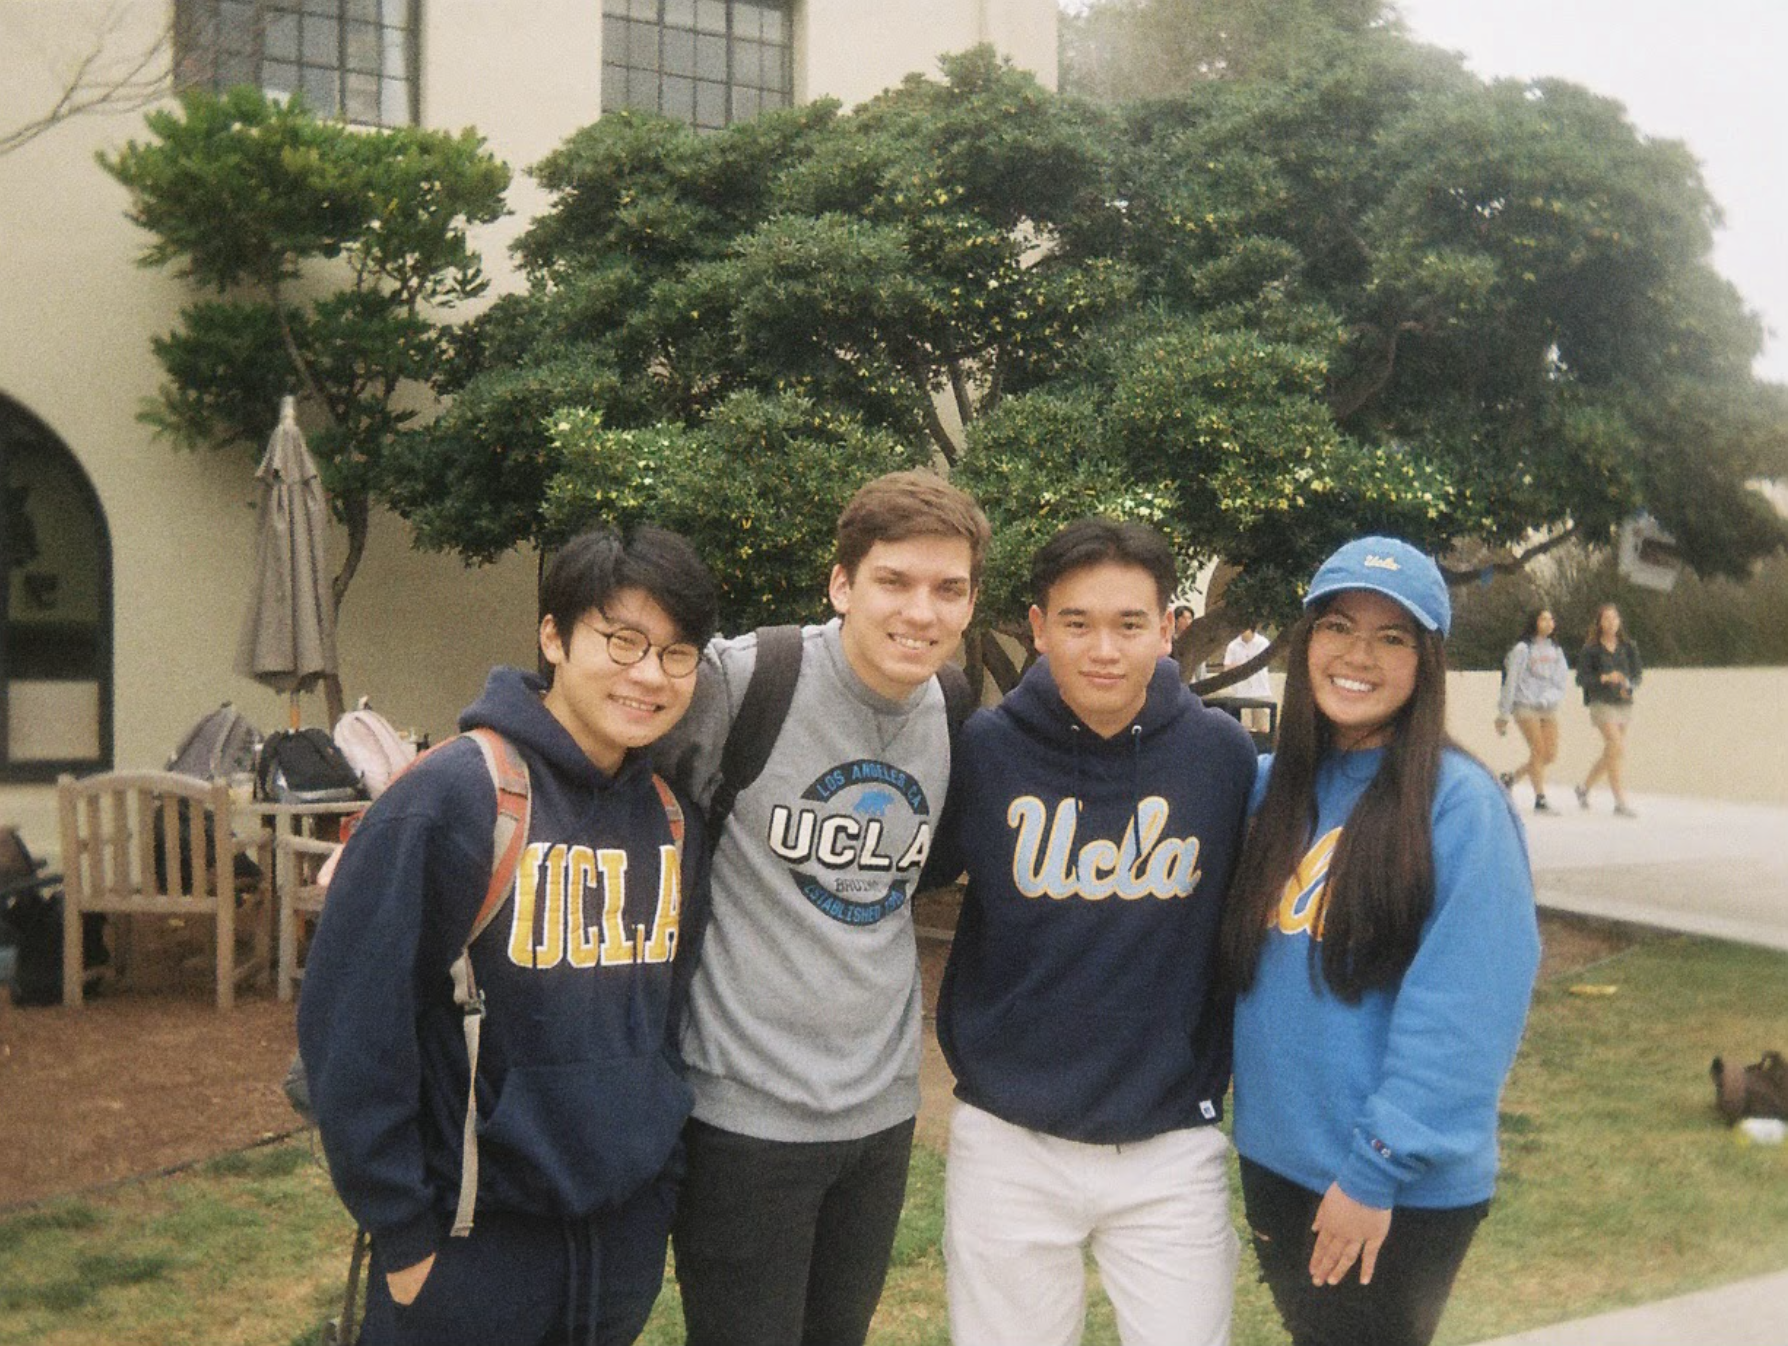 Recent alum Kosi Eguchi (‘23) (pictured second to the right, alongside Nao Nadahara (‘23), James Stutts (‘23), and Natasha Mar (‘23)) didn’t end up applying ED to any school, but he did apply EA to a few institutions. “They offered me a good balance of being able to [choose] what school I felt was best for me and [still] having the early security of knowing I got into a college,” he said.